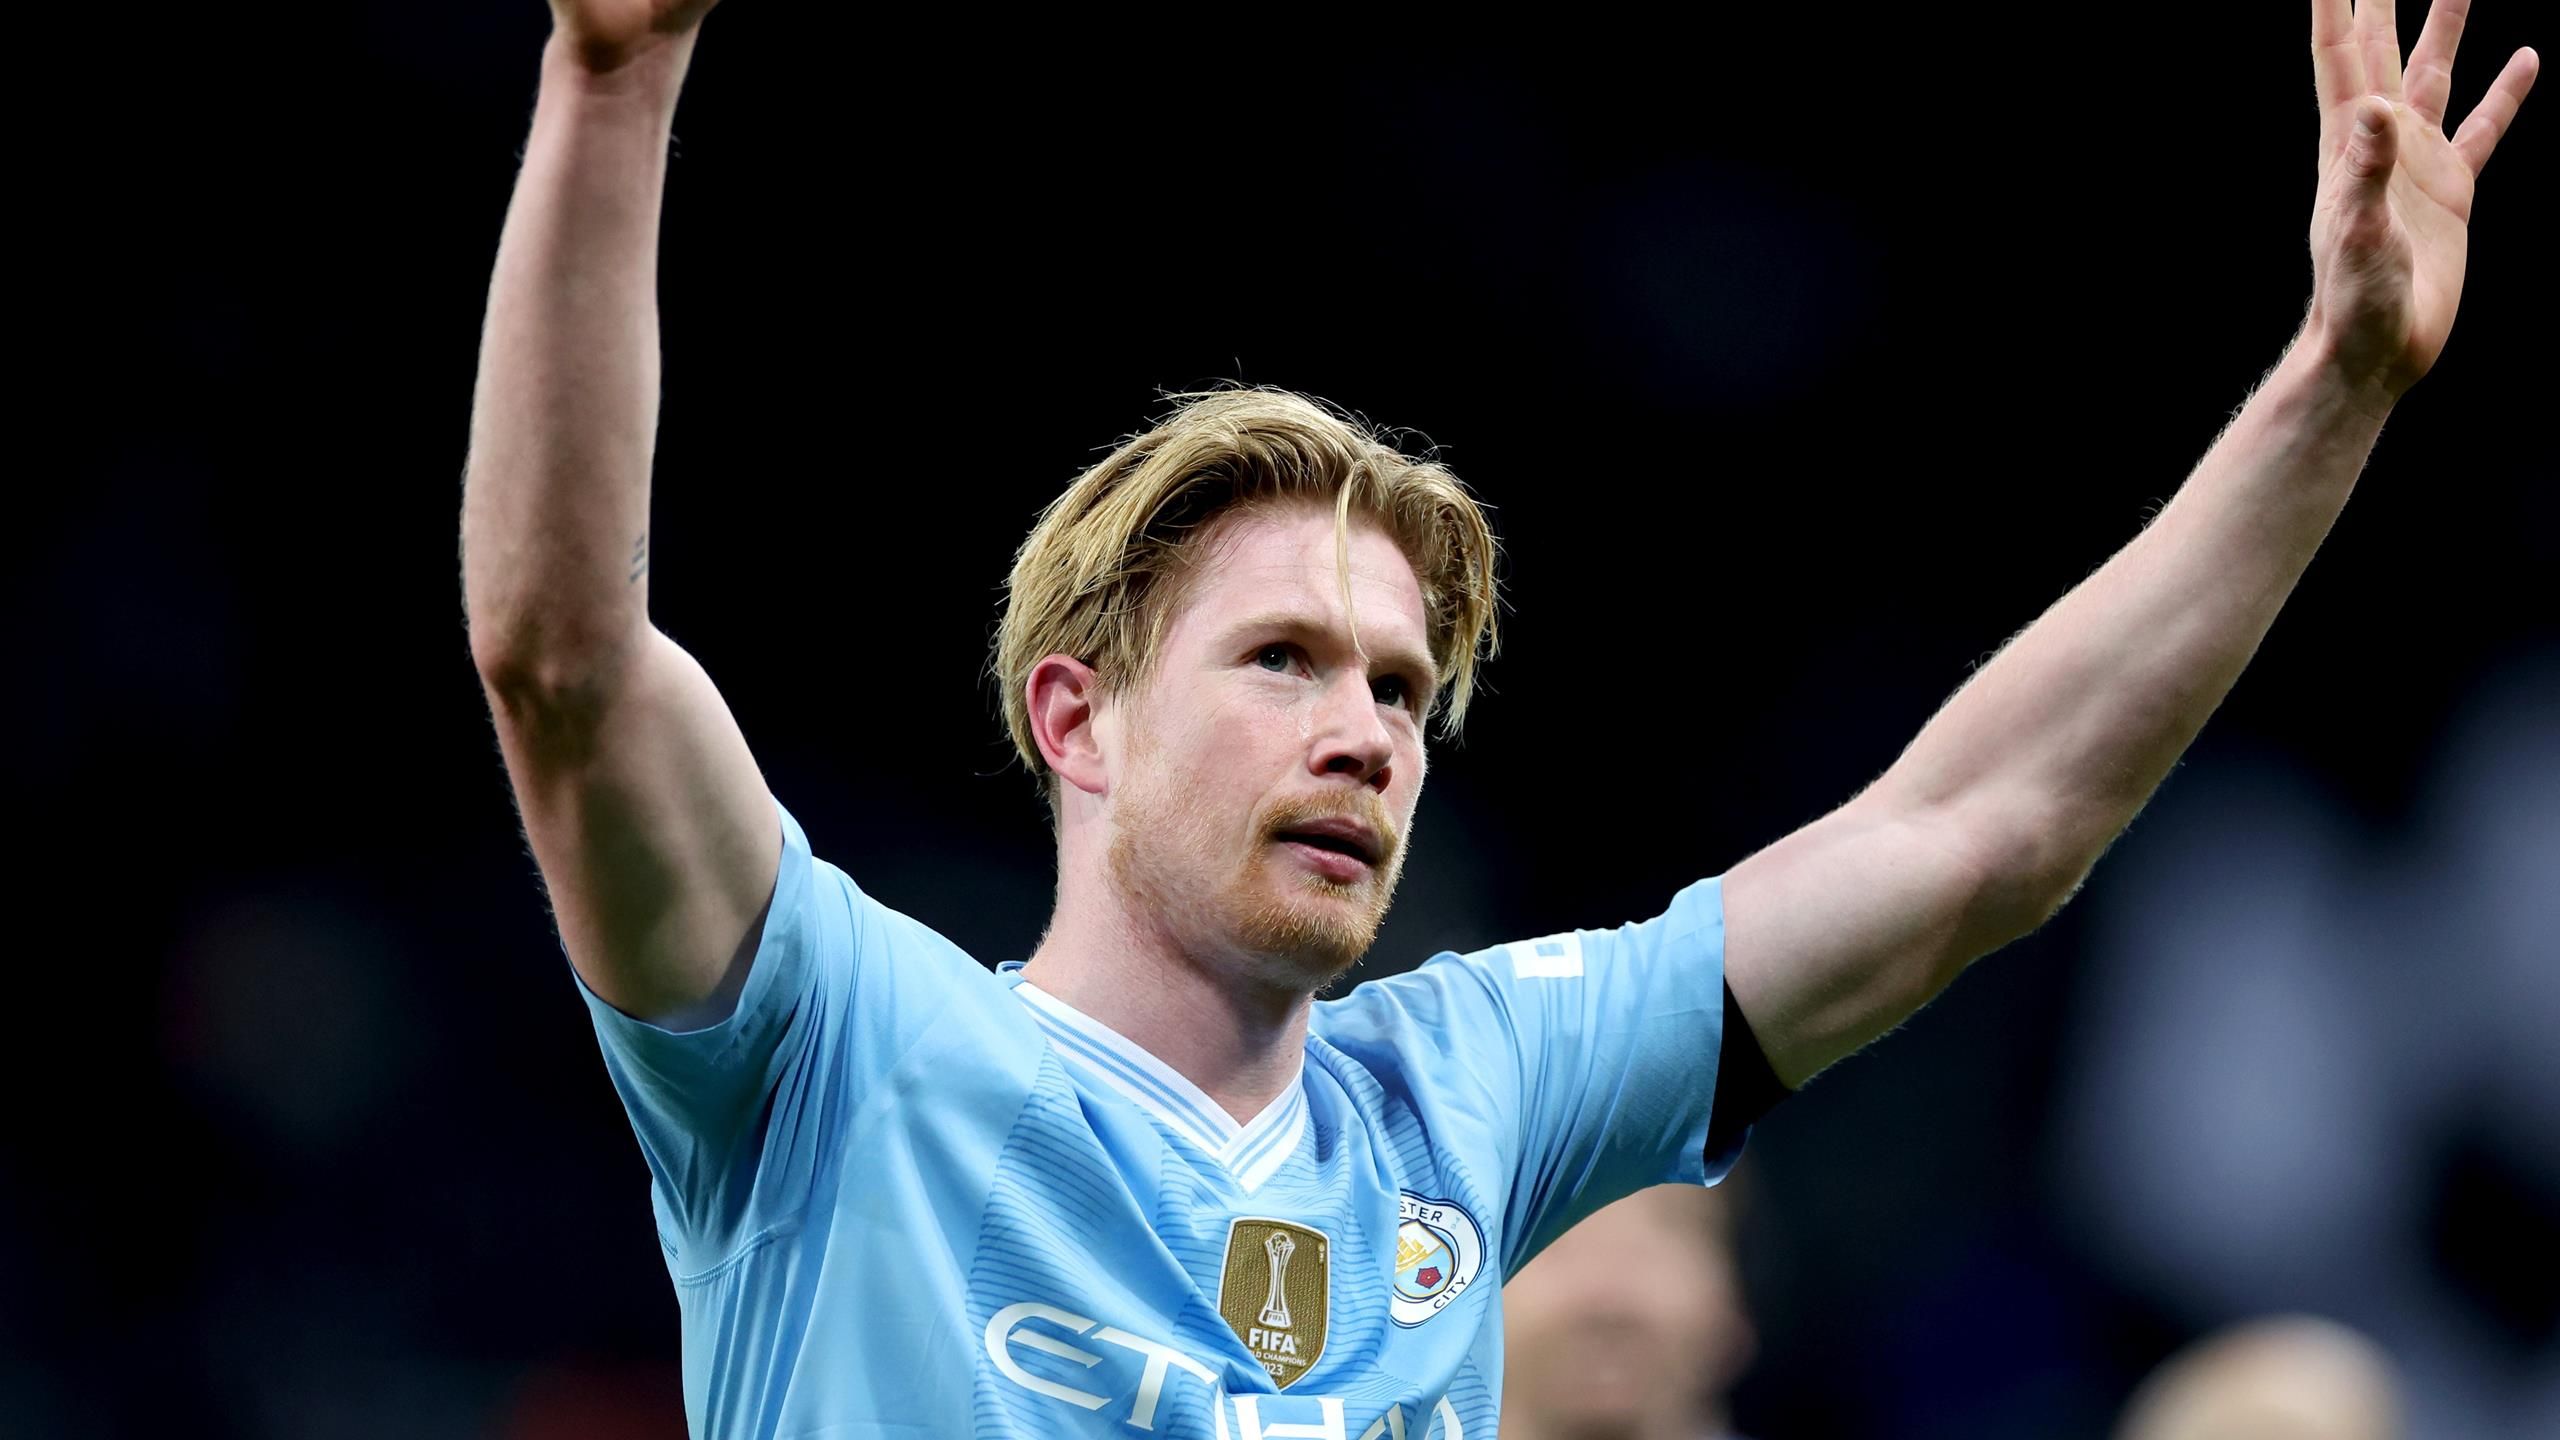 Manchester City Star Kevin de Bruyne gets Mega Offers From Saudi Pro League